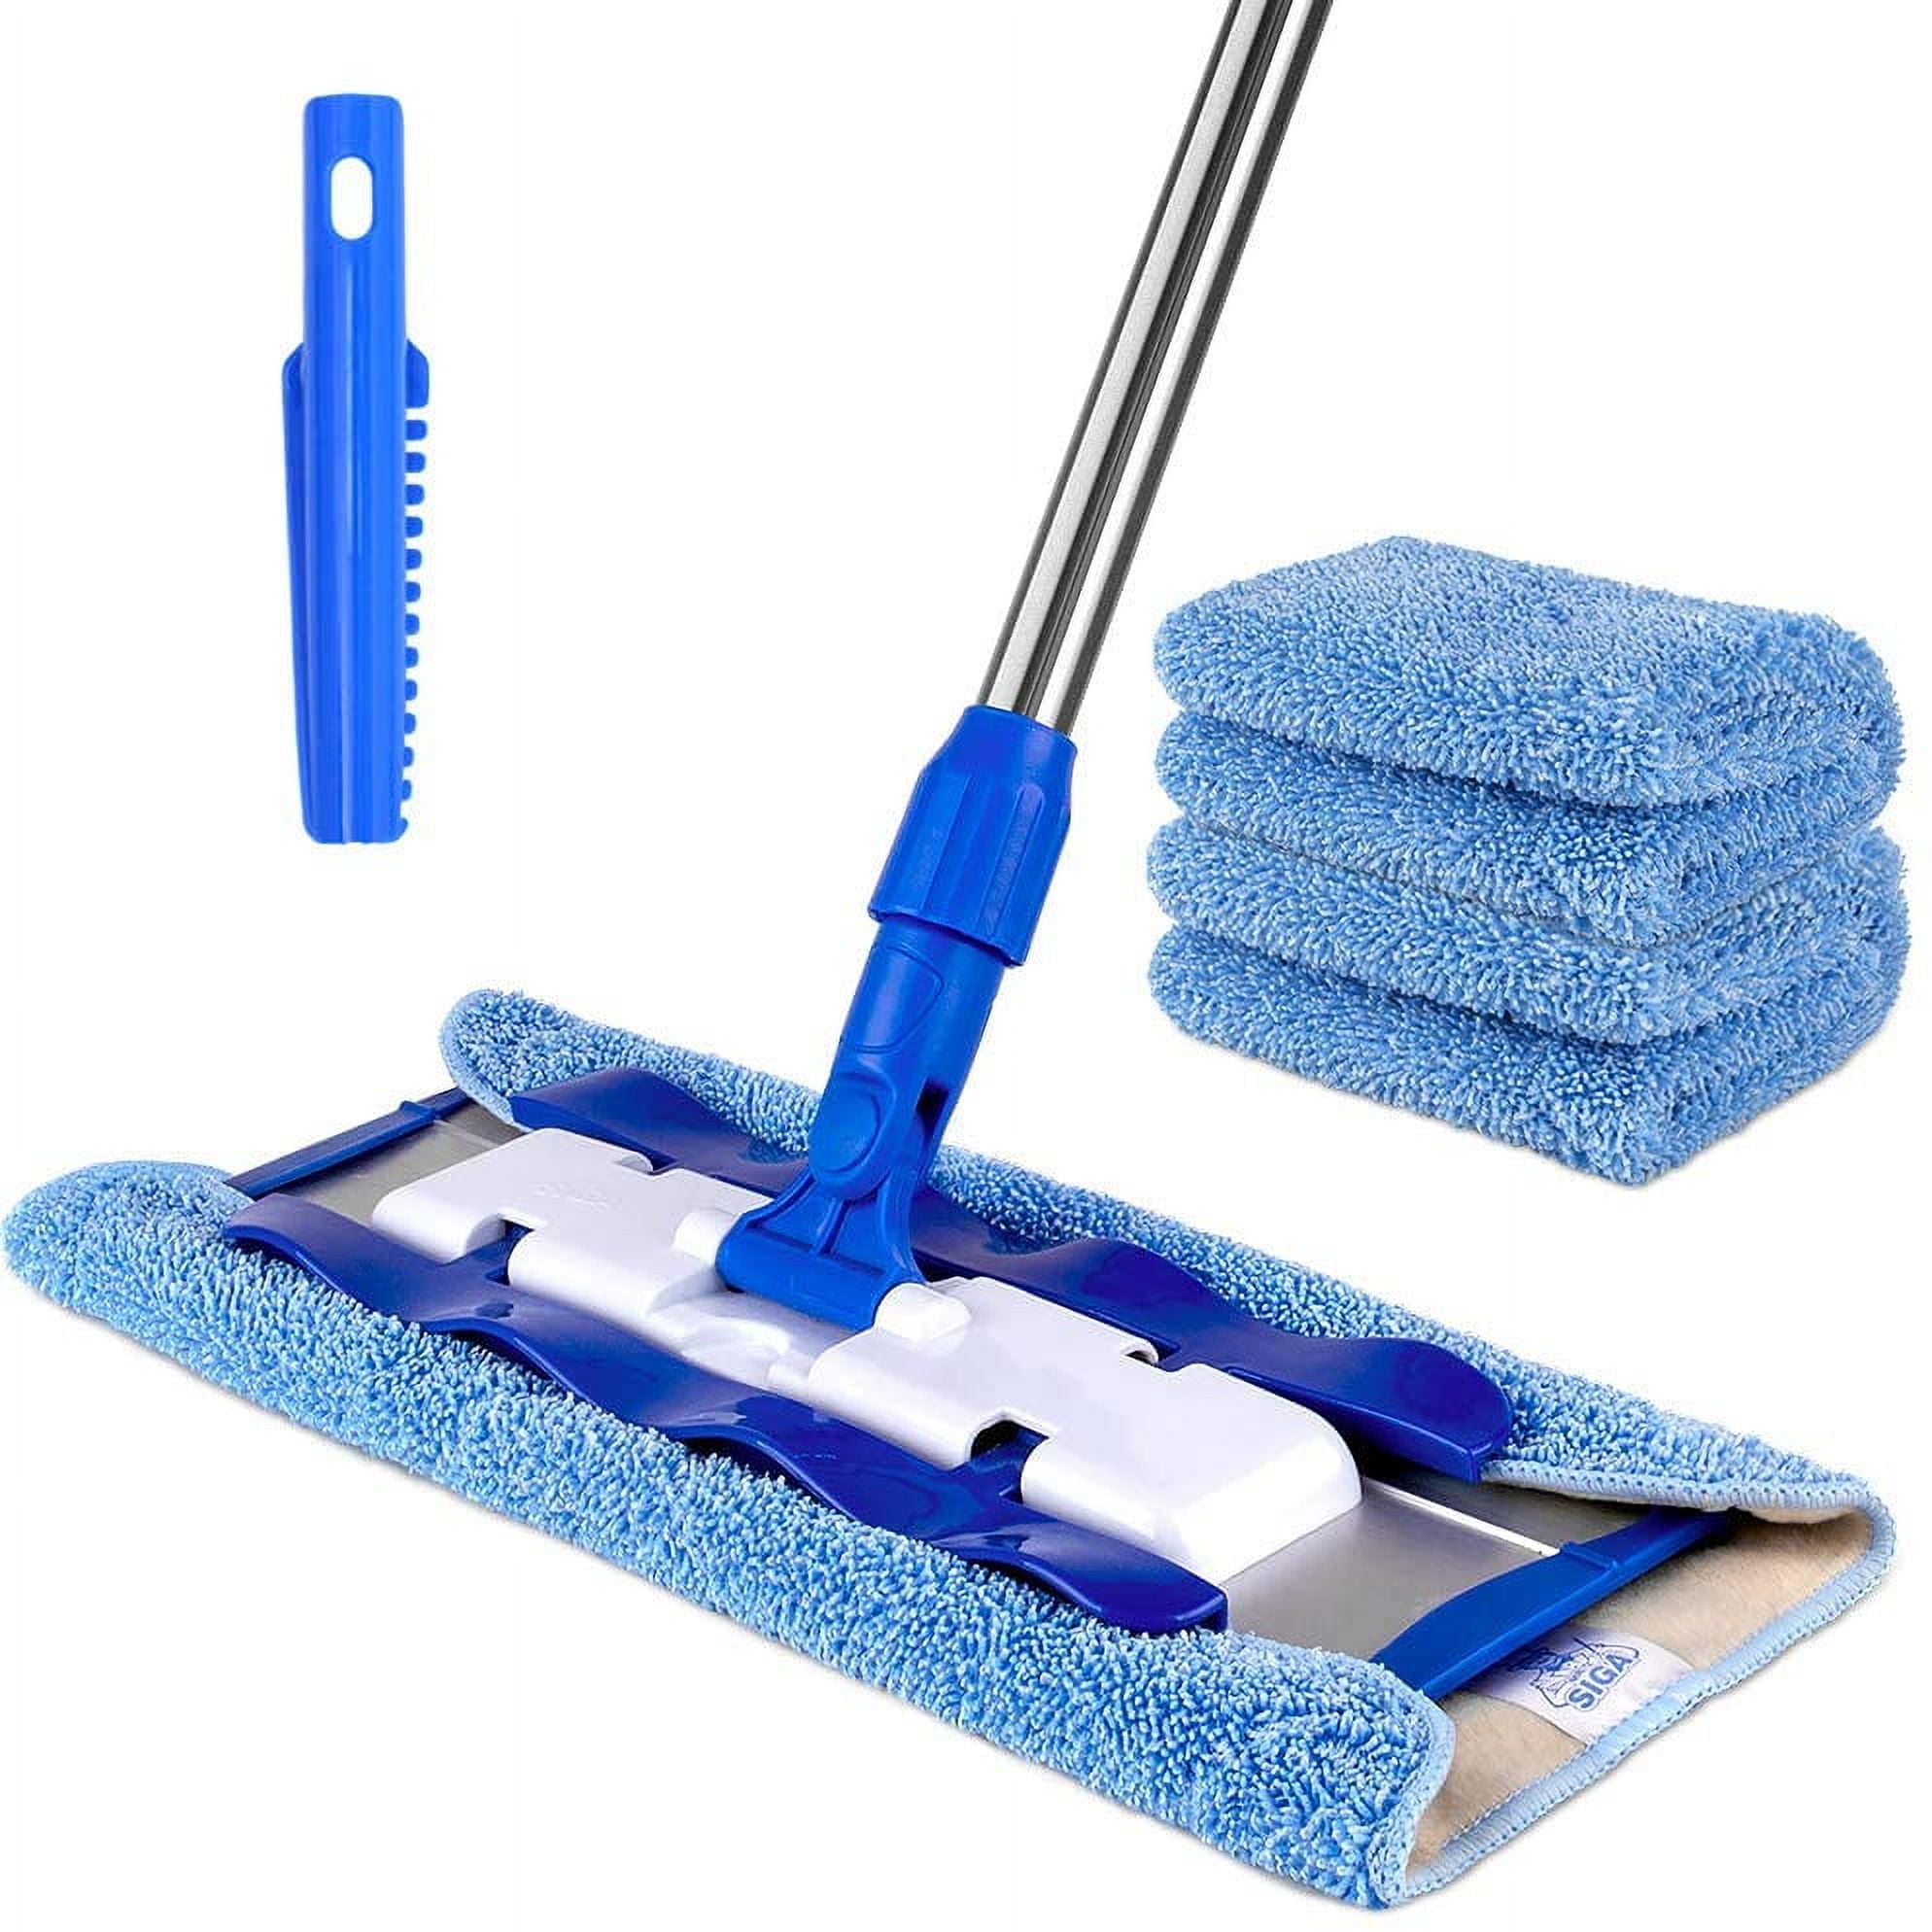 Ultimate Microfiber Cleaning Kit - Dry & Wet Mop for Hardwood, Tile, Vinyl Floors | 12Pack Microfiber Cleaning Cloth | High Duster | Glass Cleaning